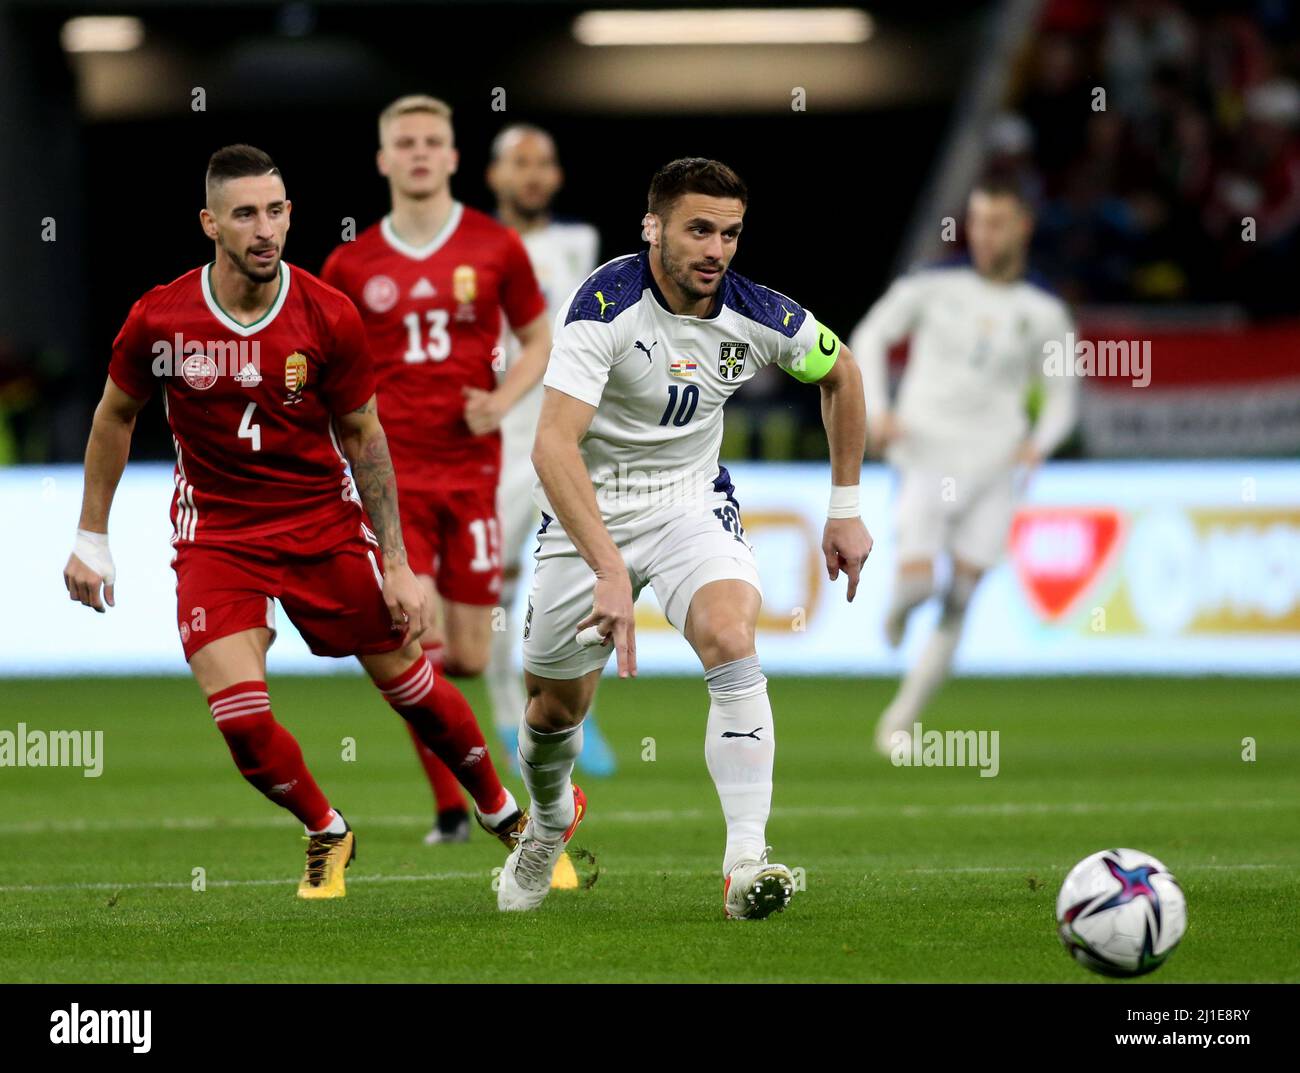 BUDAPEST, HUNGARY - MARCH 24: Dusan Tadic of Serbia competes for the ball with Zsolt Nagy of Hungary ,during the international friendly match between Hungary and Serbia at Puskas Arena on March 24, 2022 in Budapest, Hungary. (Photo by MB Media) Stock Photo